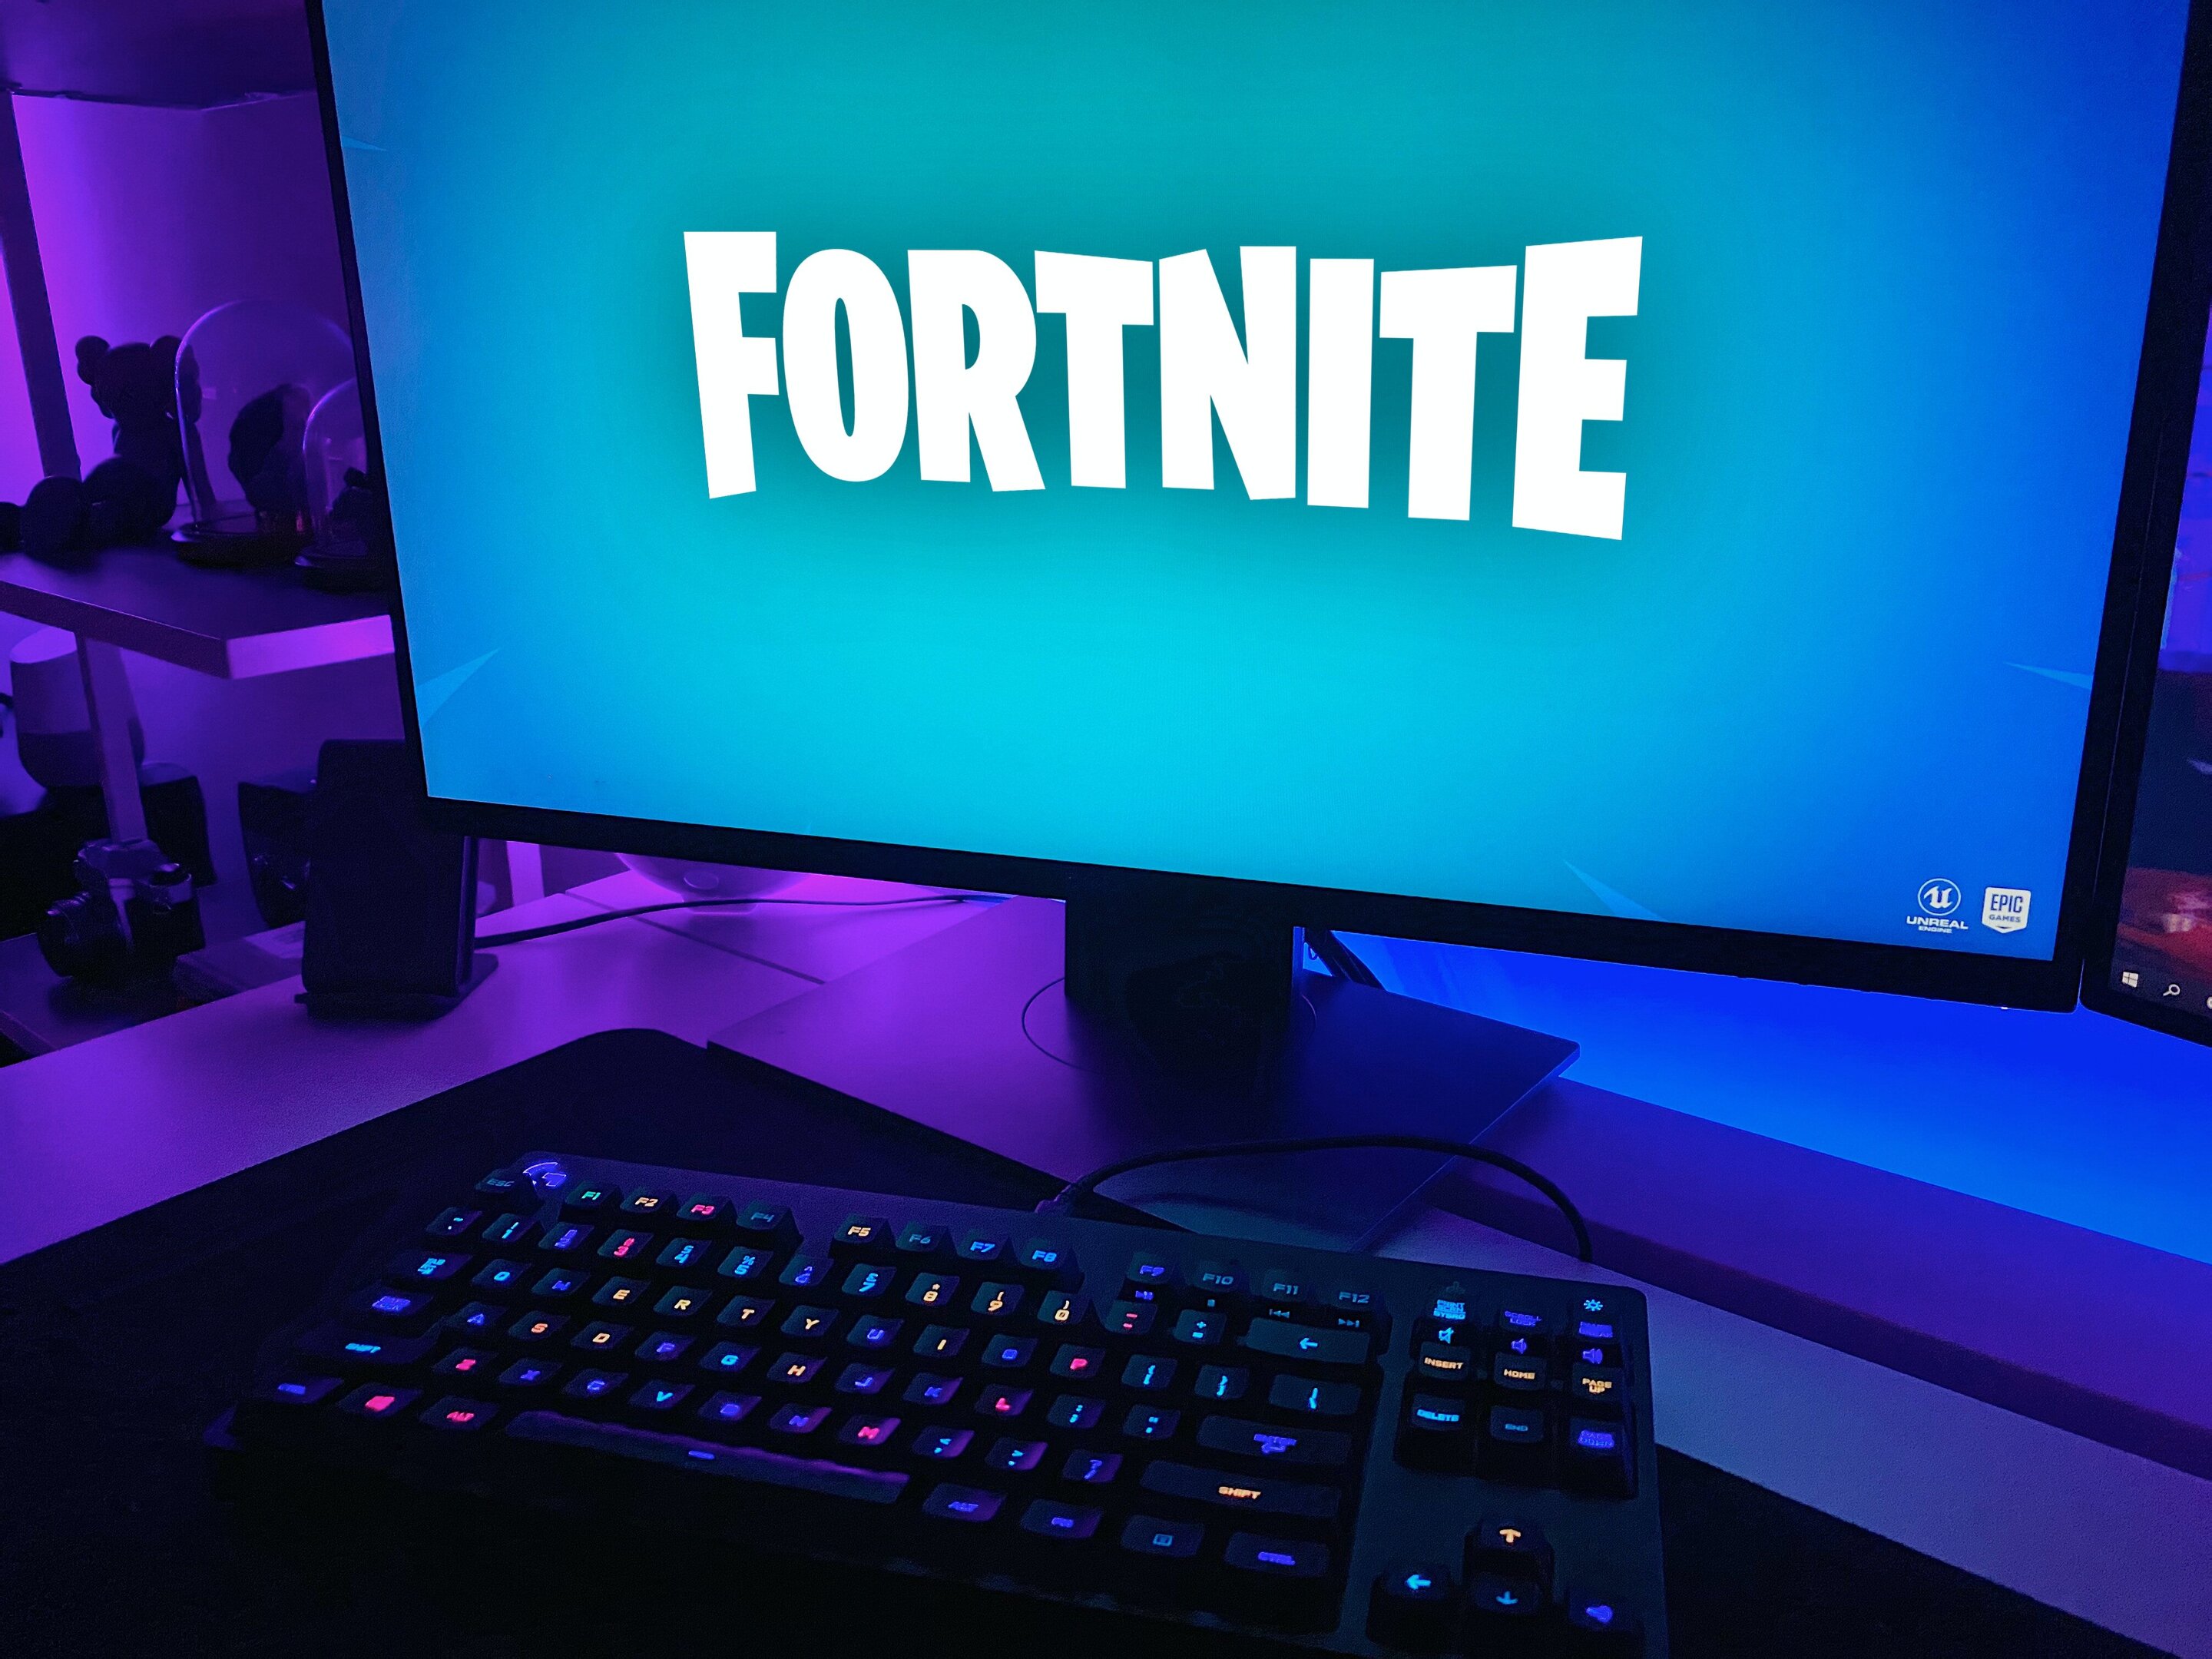 Raleigh to host first in-person Fortnite tournament since 2019 World Cup